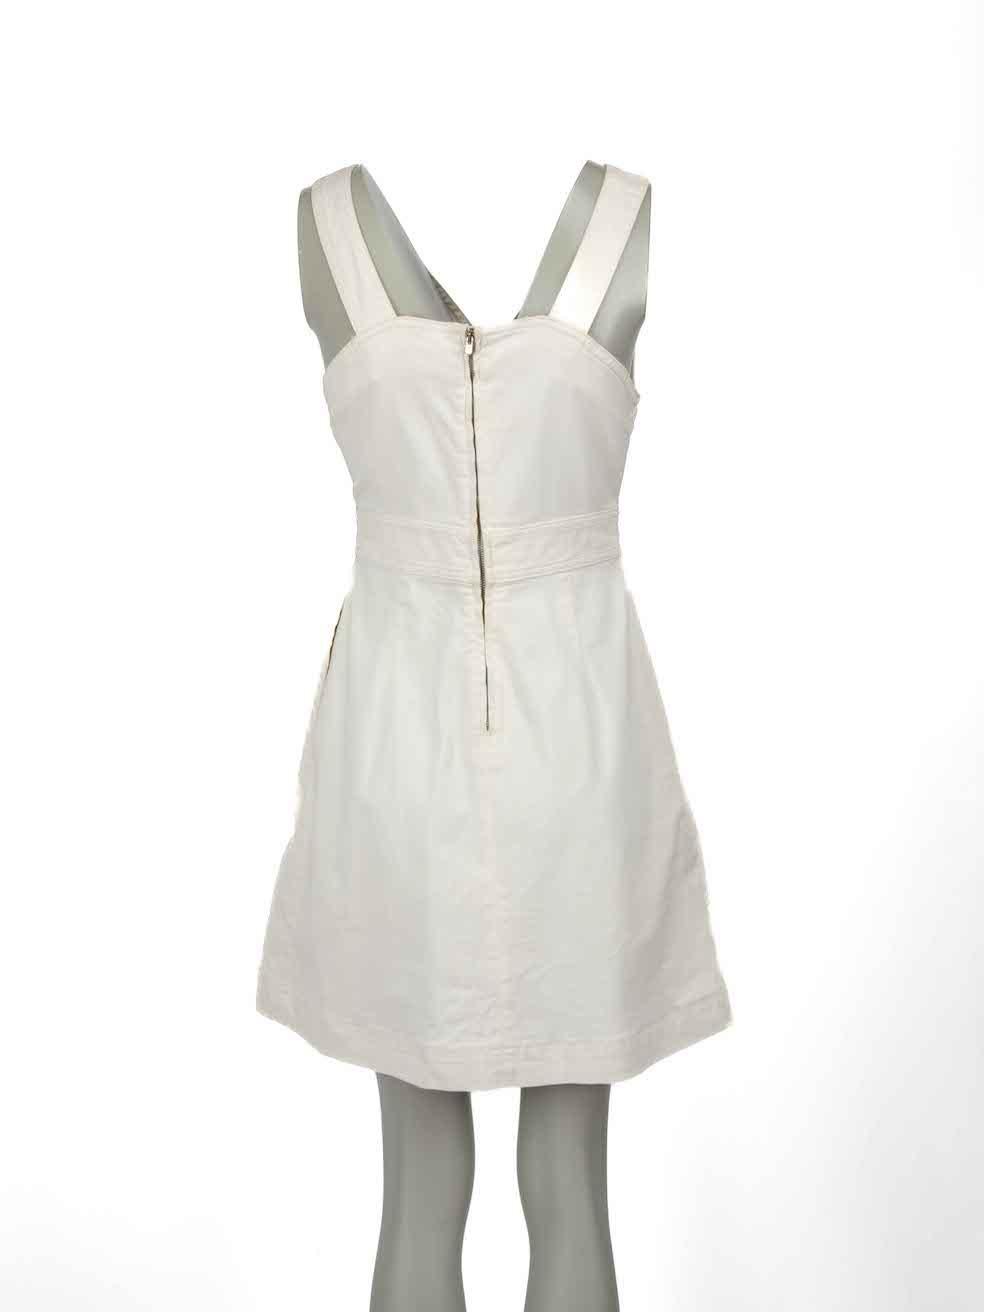 Stella McCartney White Denim Cut Out Mini Dress Size M In Excellent Condition For Sale In London, GB